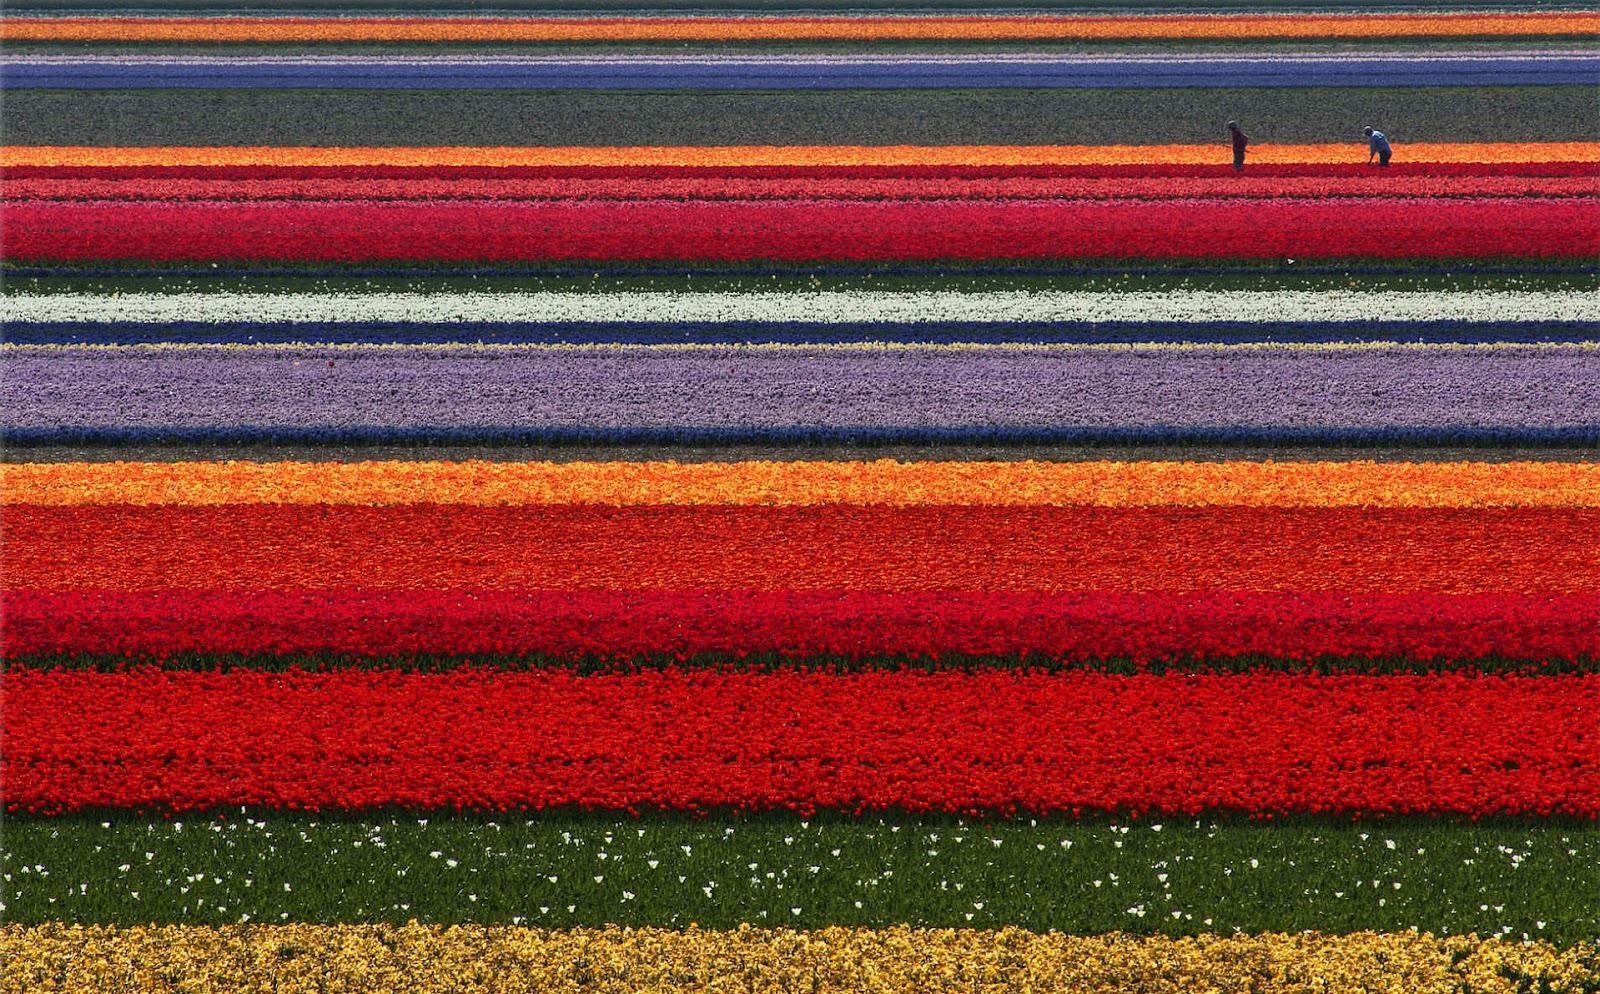 Photosynthesis Floral Design: Tulip Fields